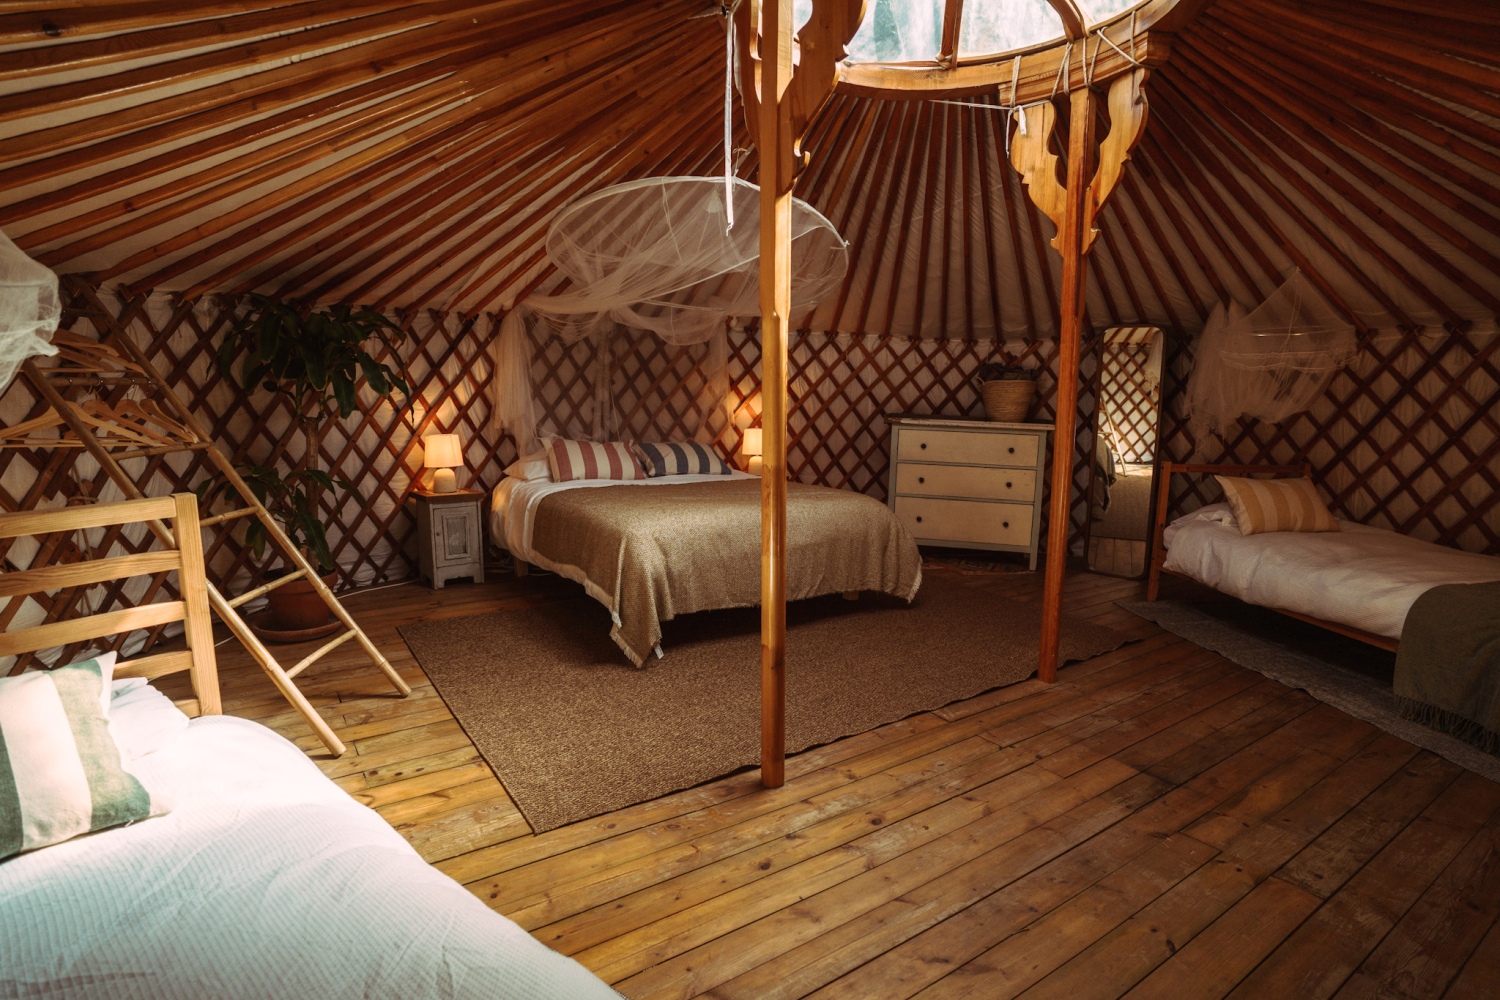 Beds in wooden yurt shaped room